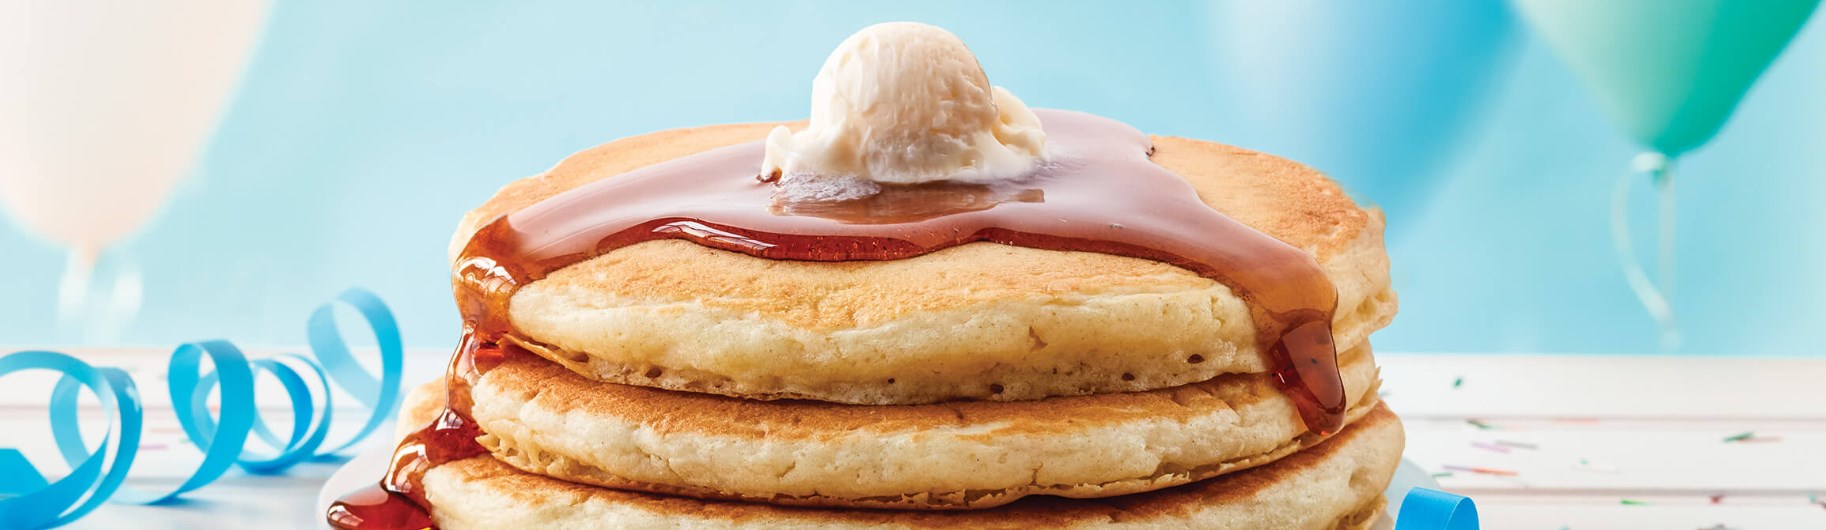 IHOP: Short stack of pancakes for $.59 today!